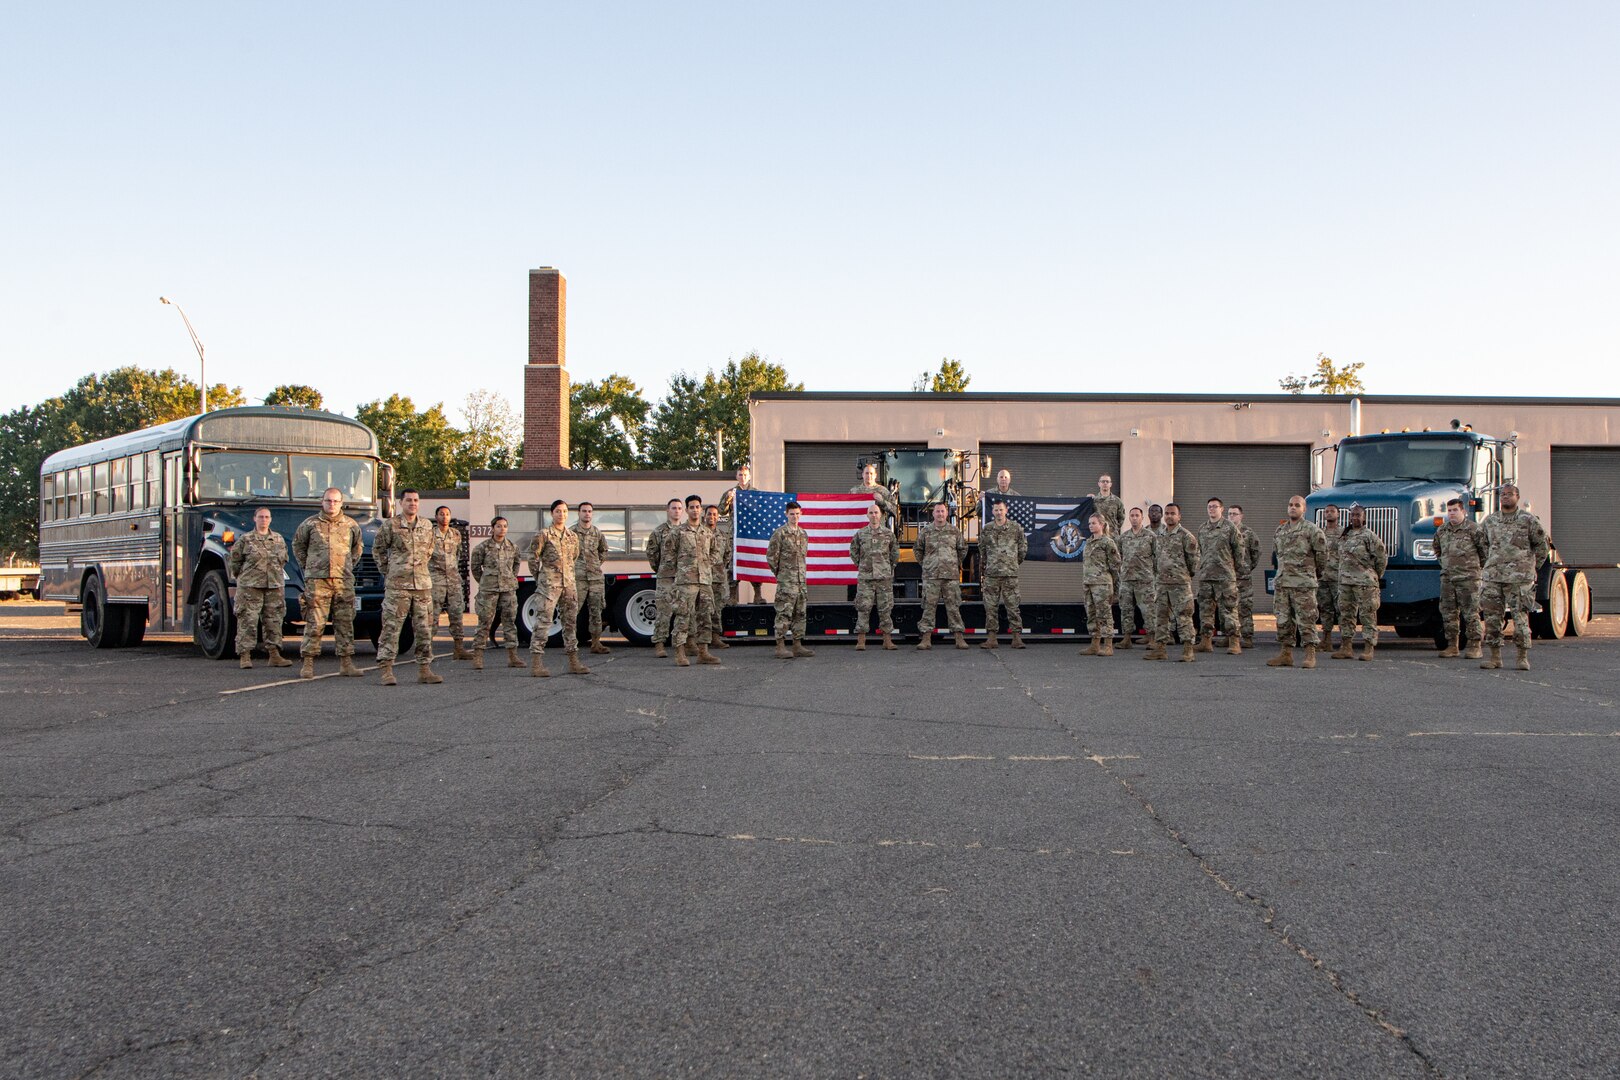 Airmen posing for group photo in front of vehicles and heavy equipment